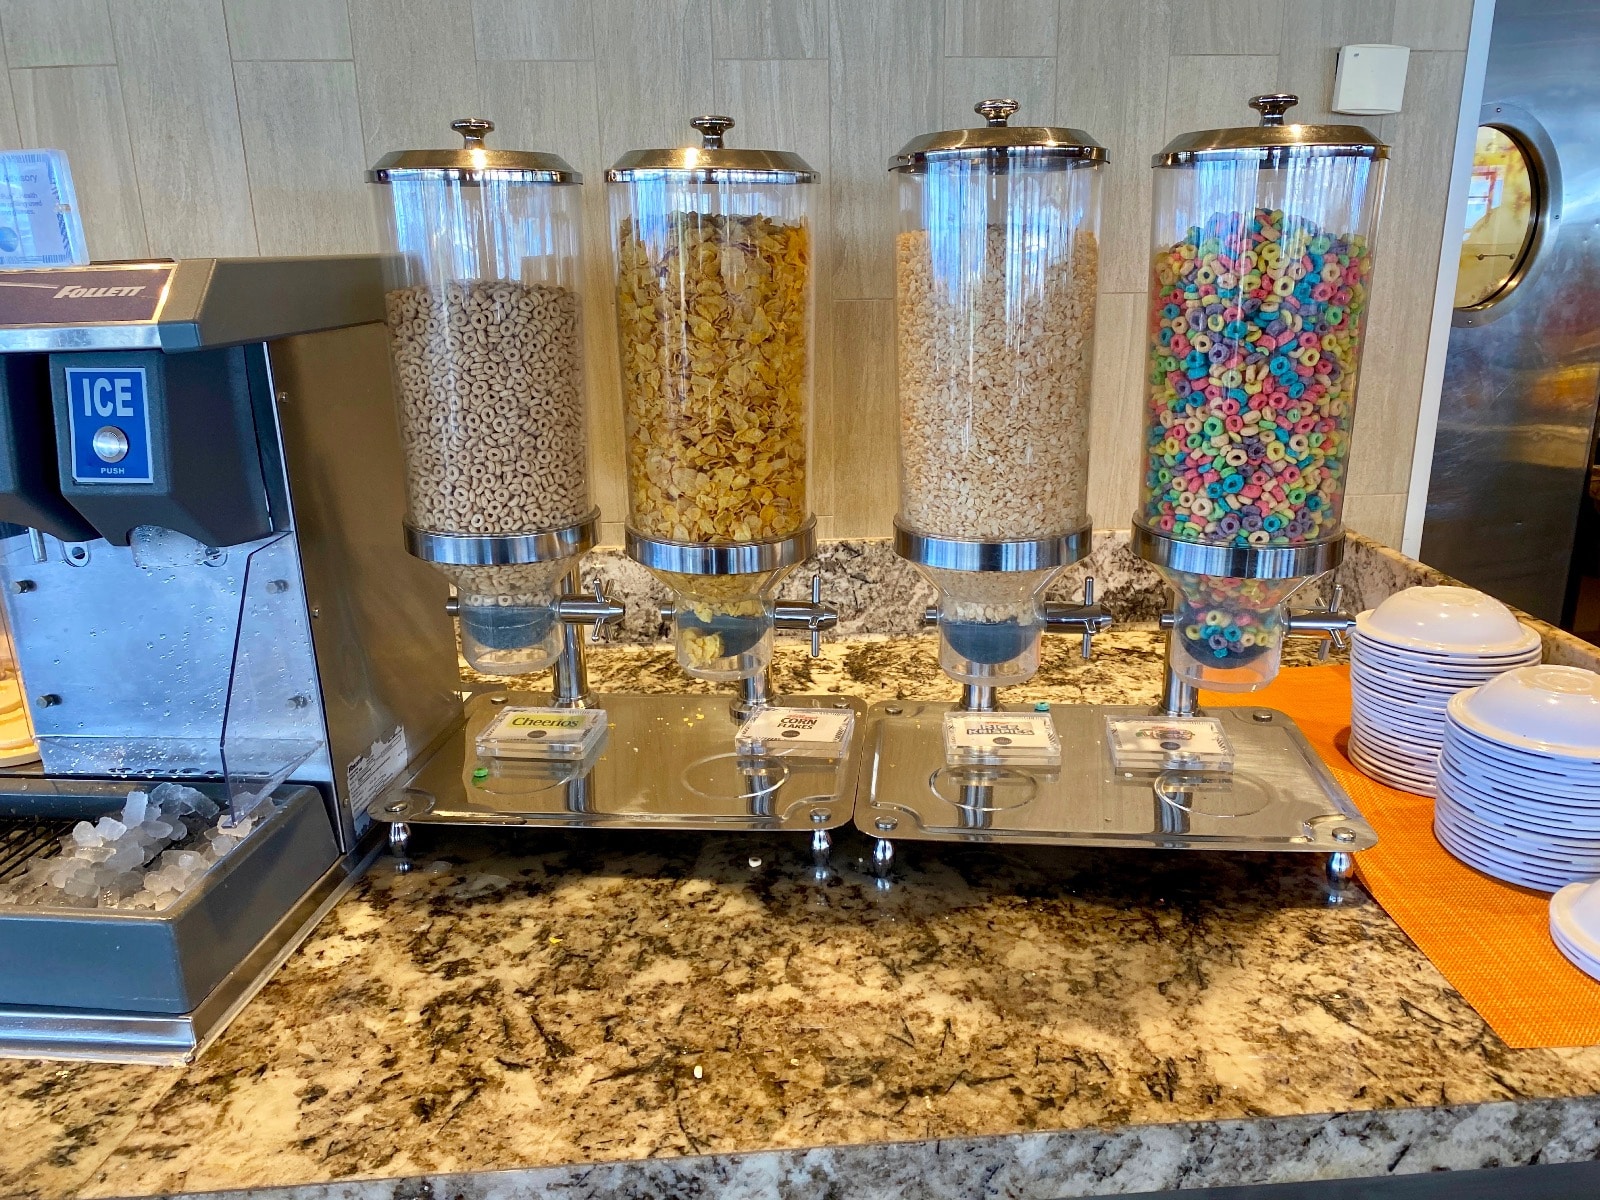 a group of cereals in a dispenser